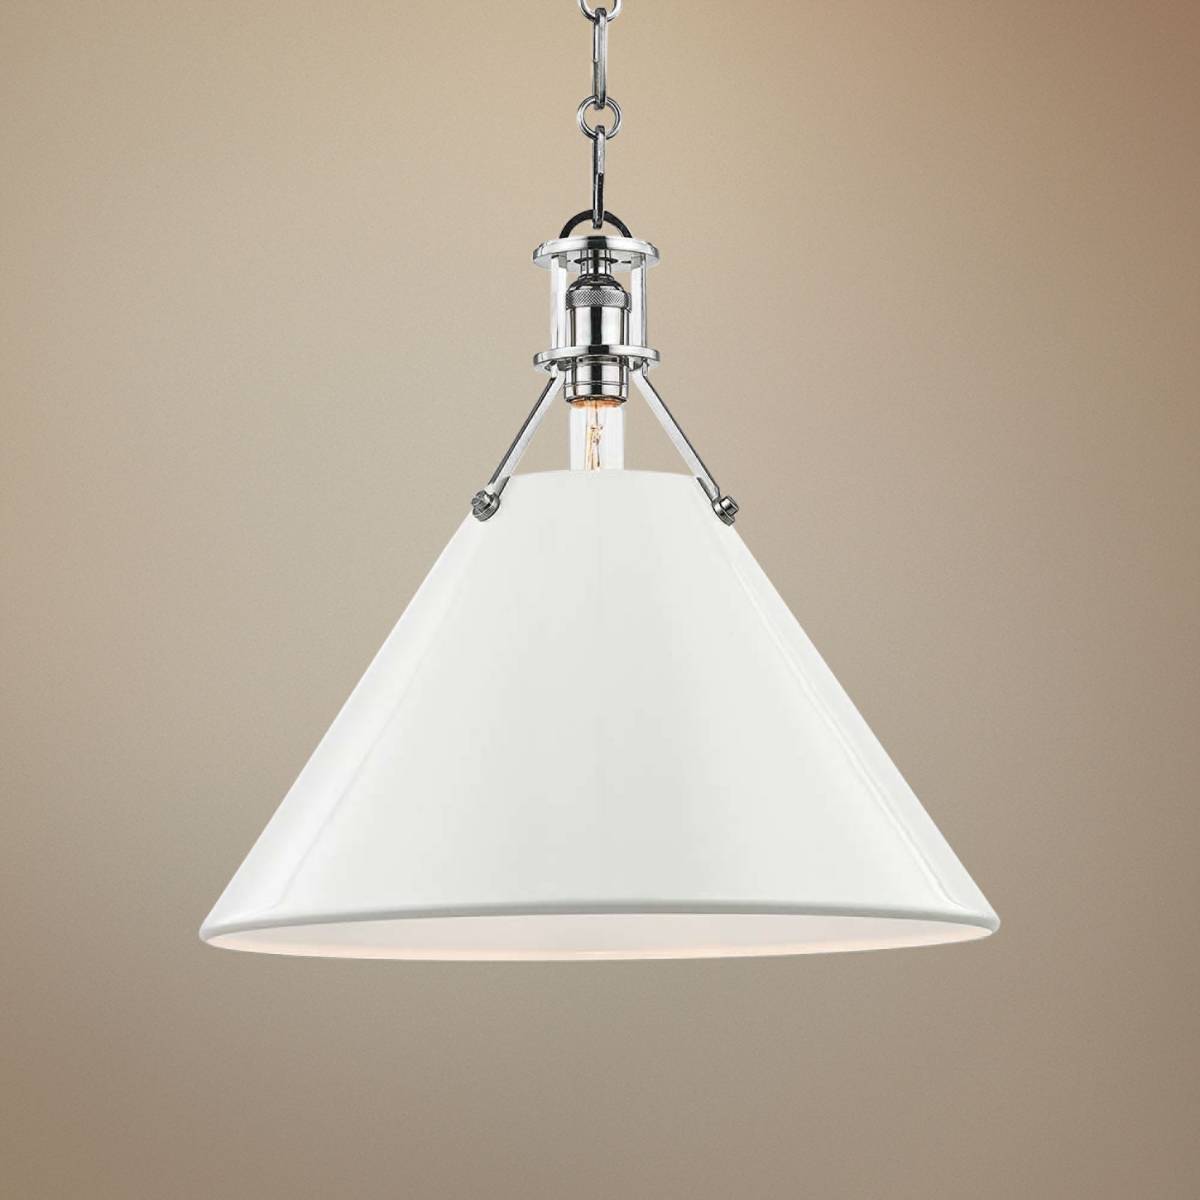 Painted No 2 16 W Polished Nickel Pendant W Off White Shade  65e24cropped ?qlt=70&wid=1200&hei=1200&fmt=jpeg